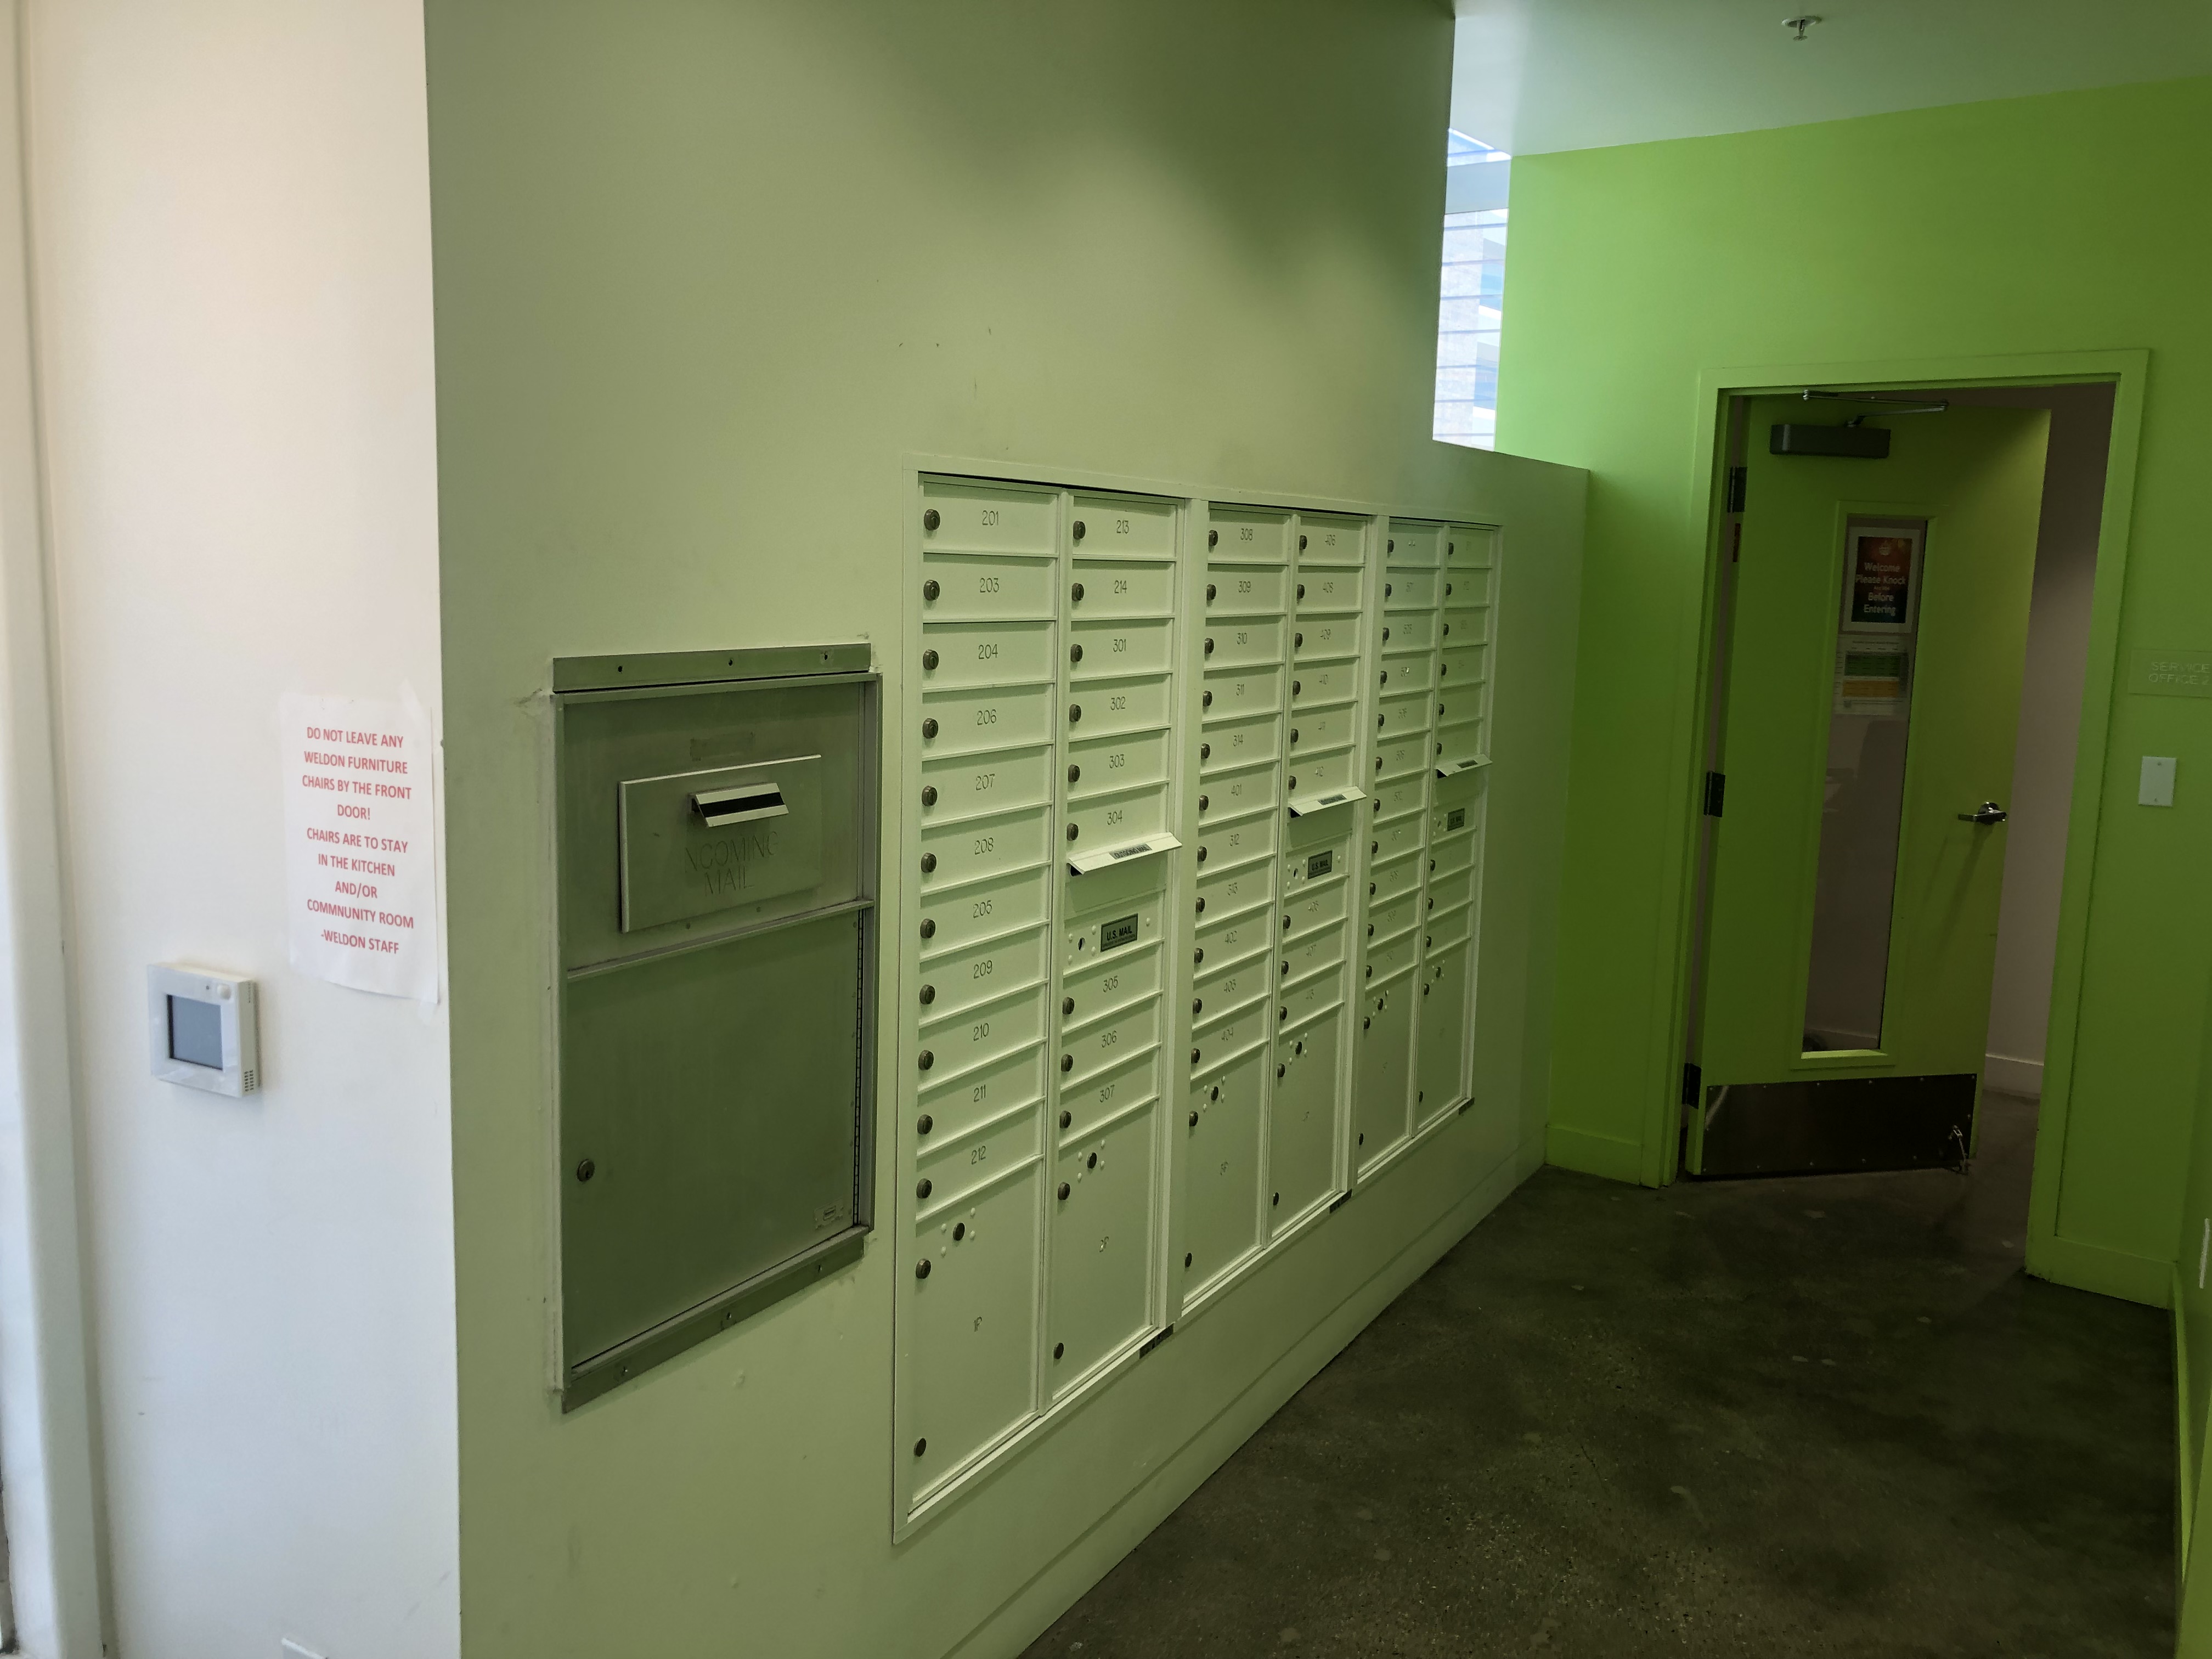 Interior view showing mailboxes along a wall at the Weldon Hotel